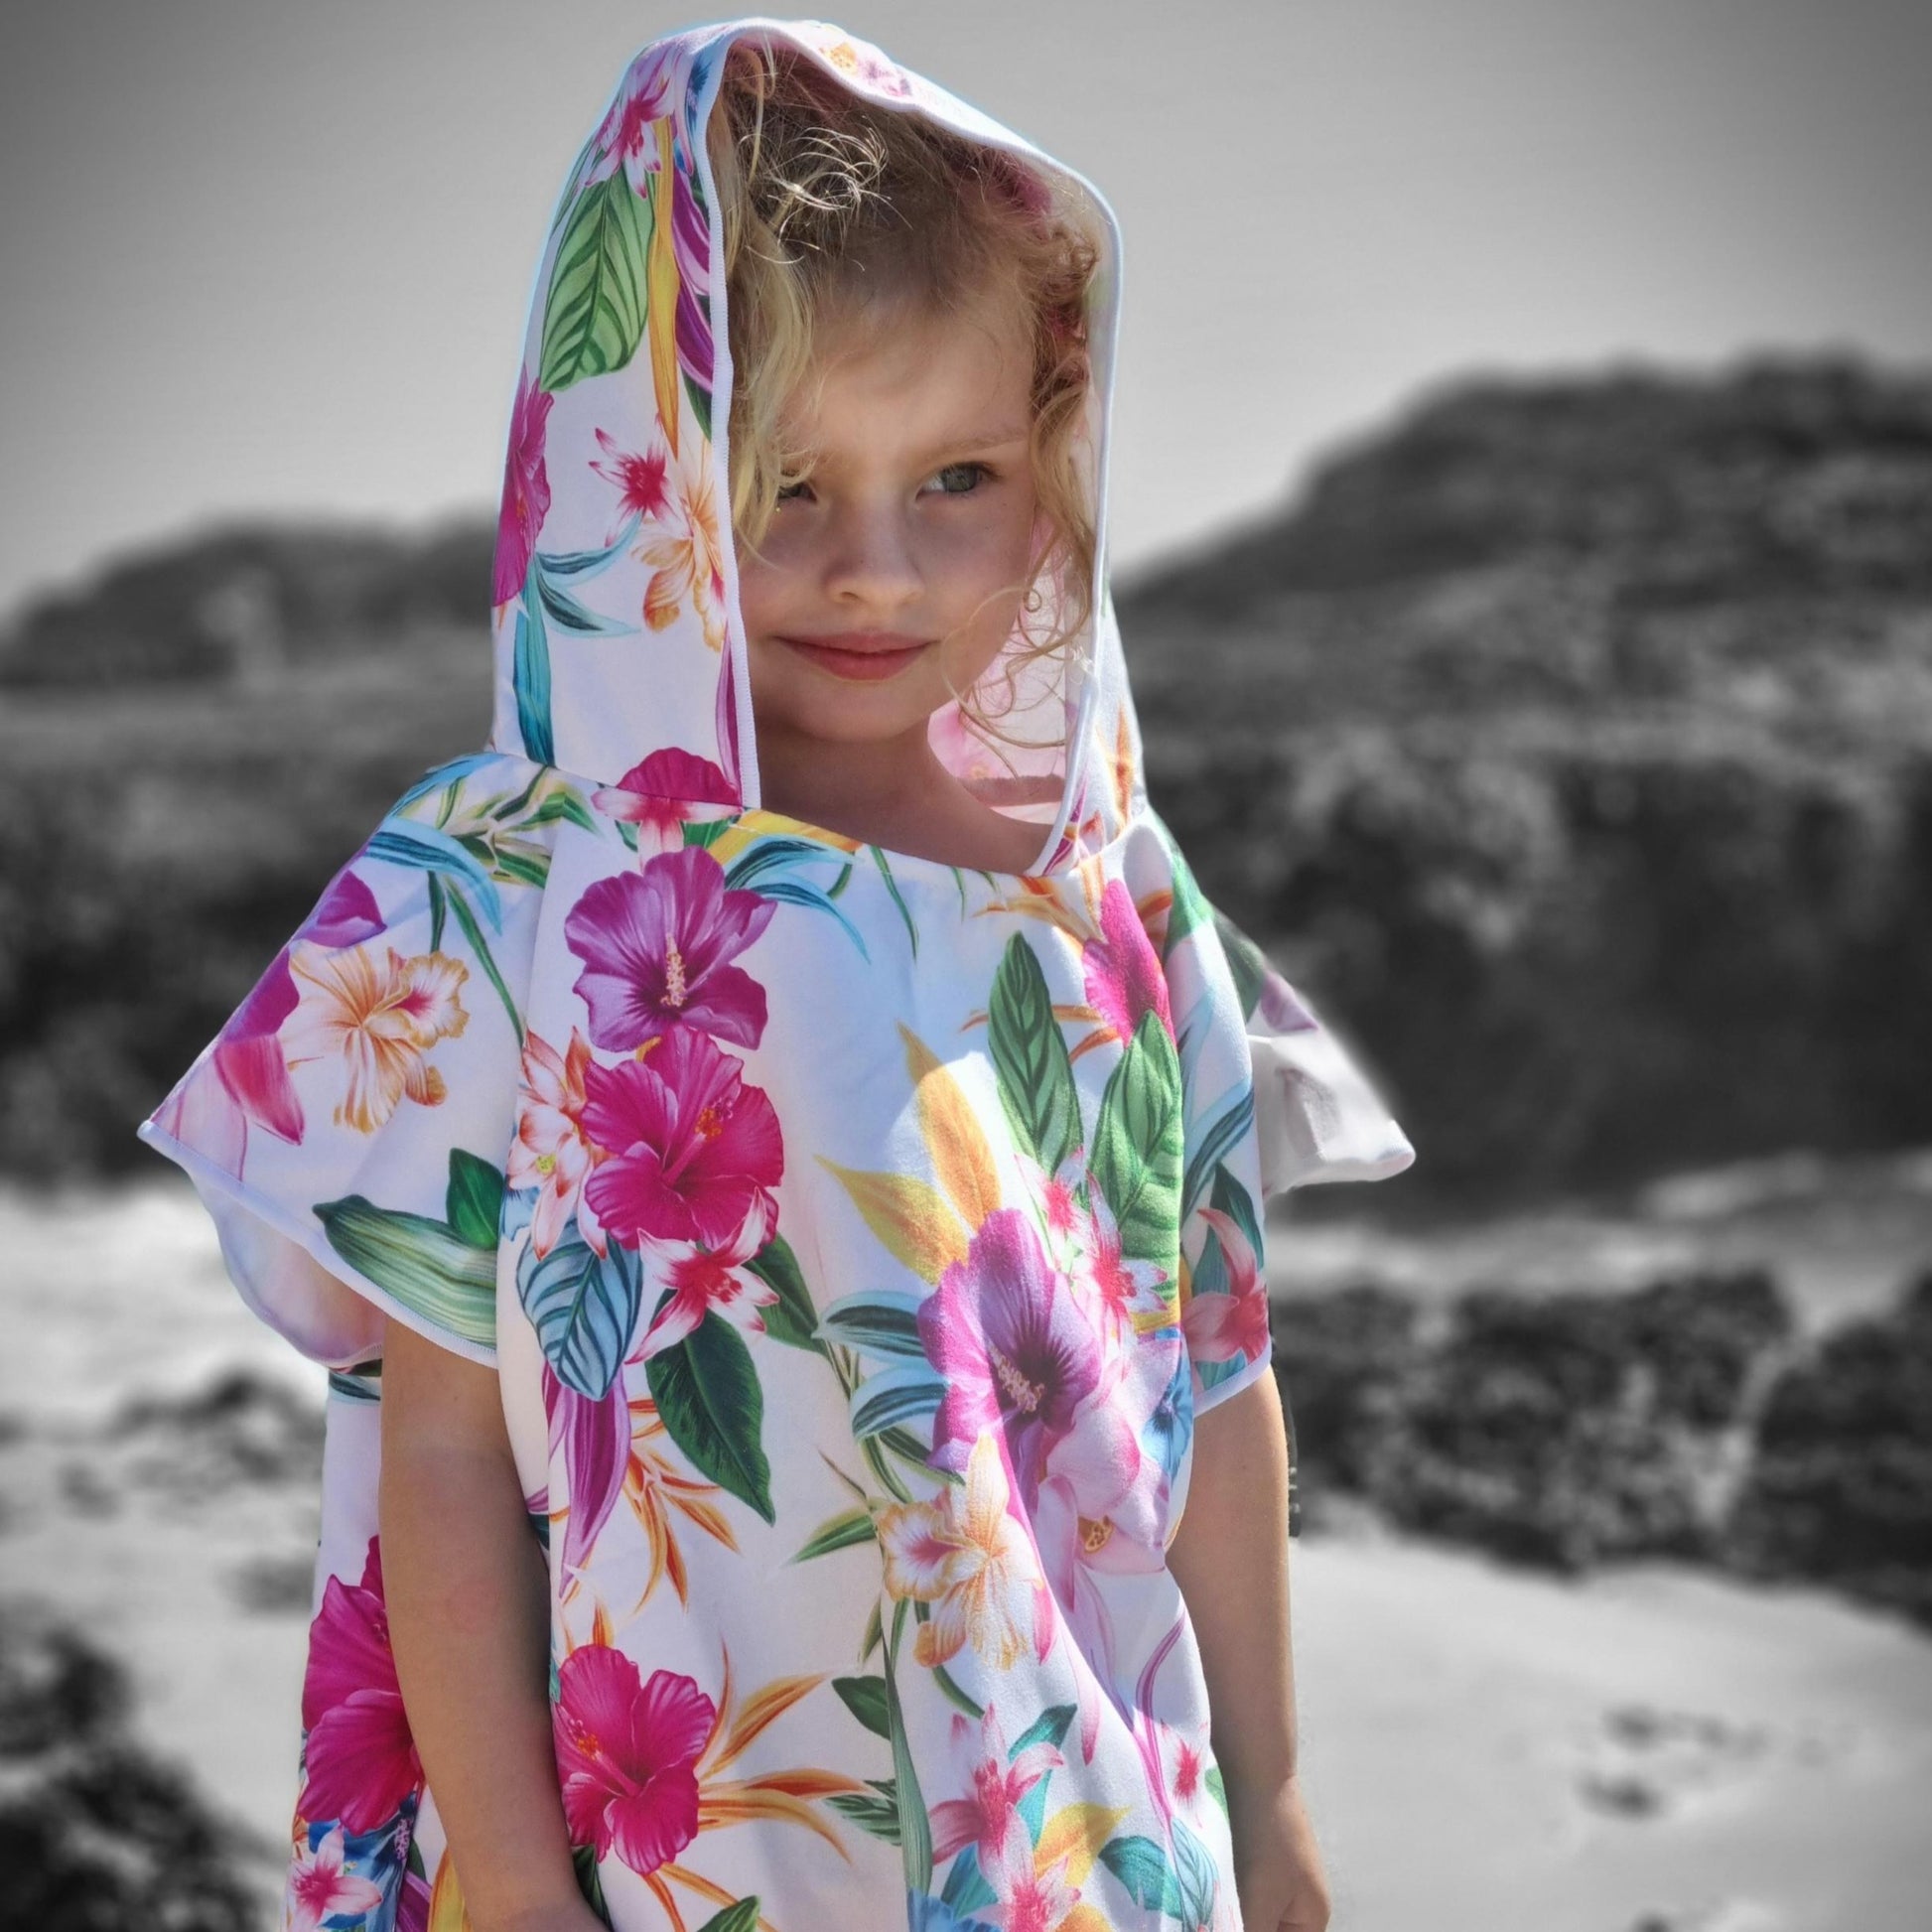 Sand Free Beach Towel with 3 year old girl with Hibiscus flowers on a predominately white sand free beach towel